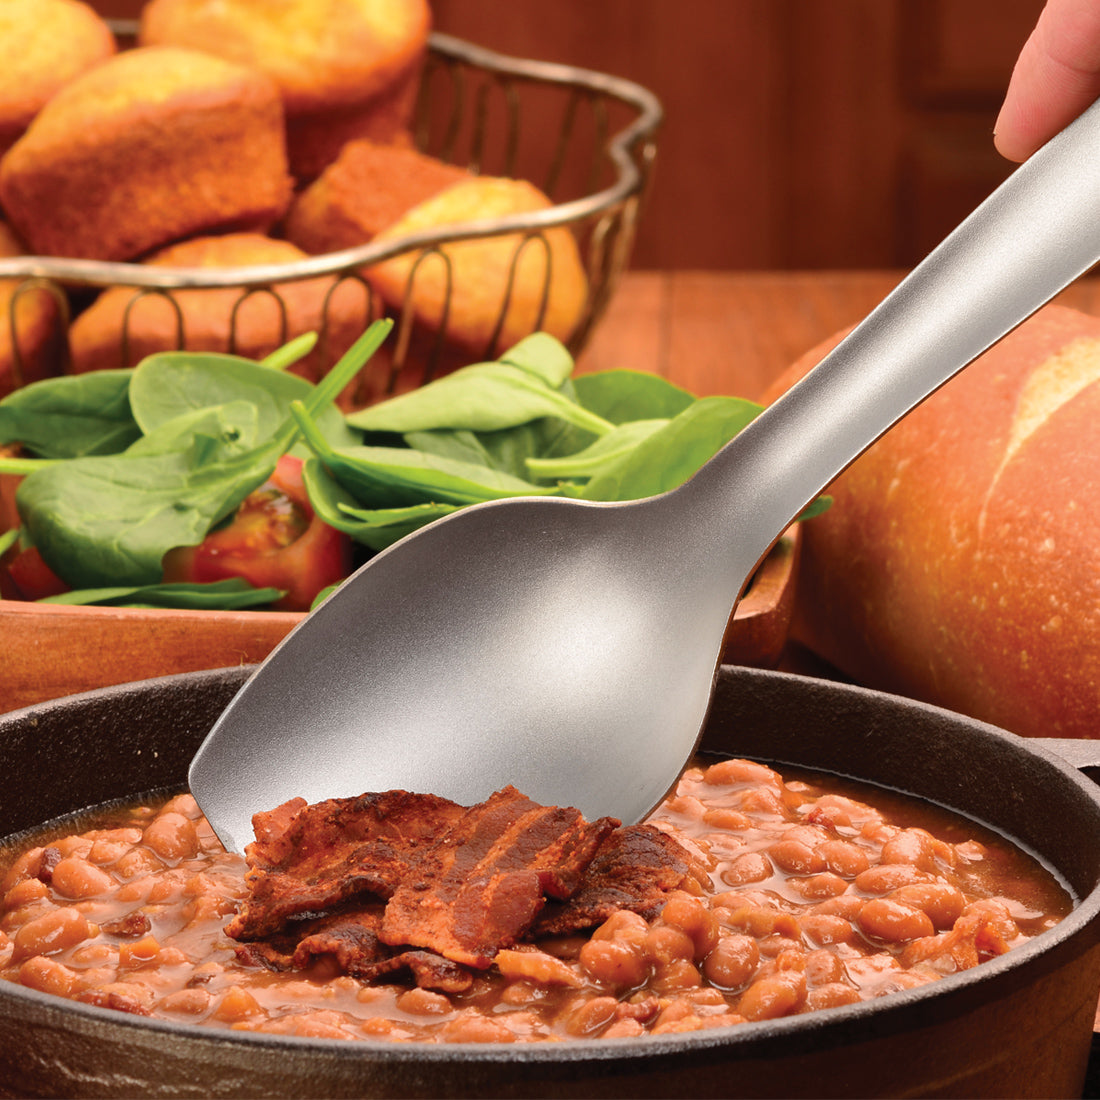 Cook's Spoon scooping a portion of baked beans with a bacon topping